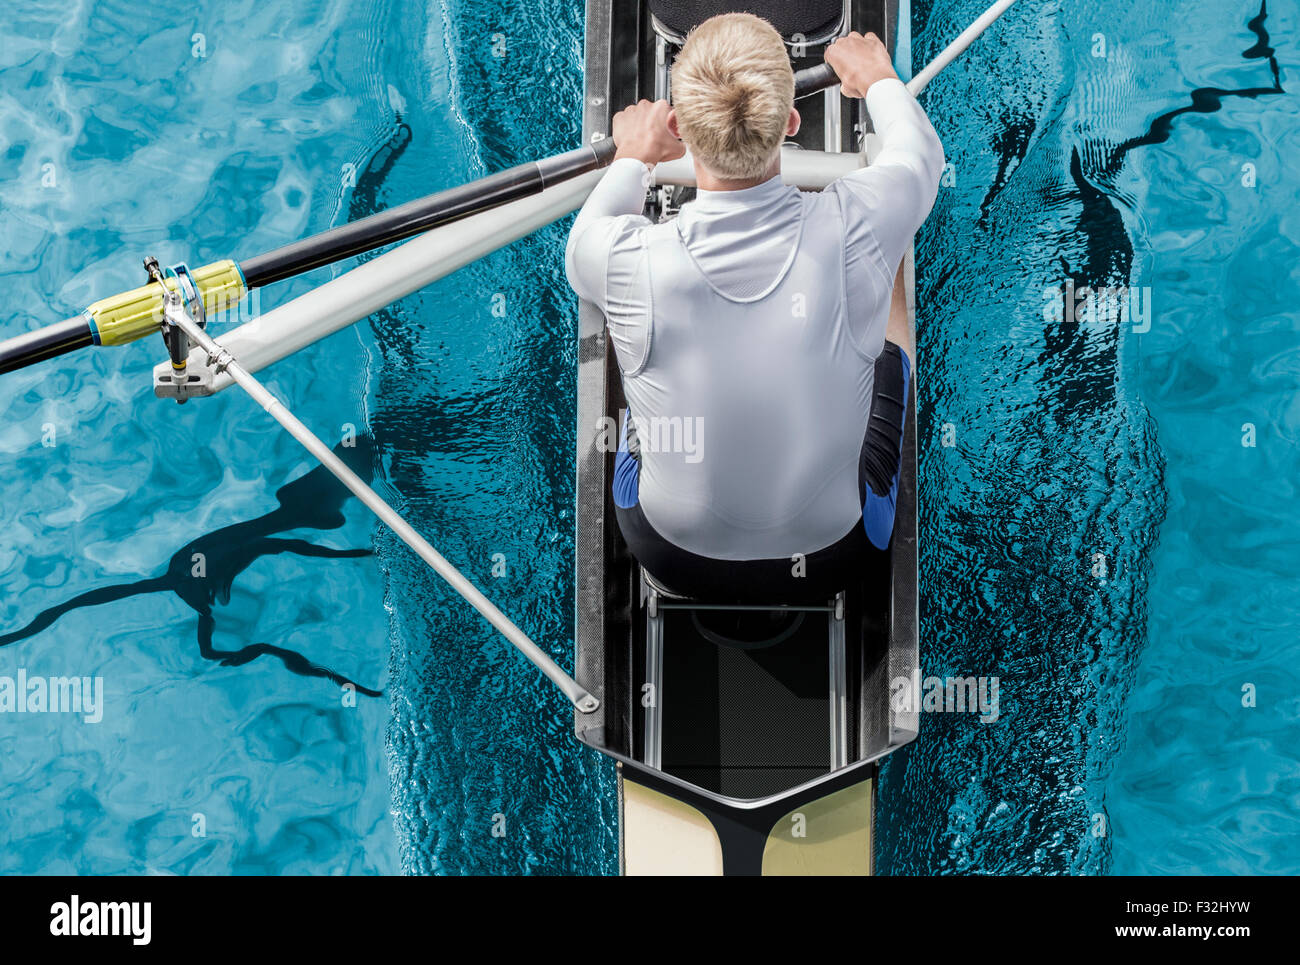 Top view of athletic competition rower, who strokes his  paddle through metallic blue water. Stock Photo